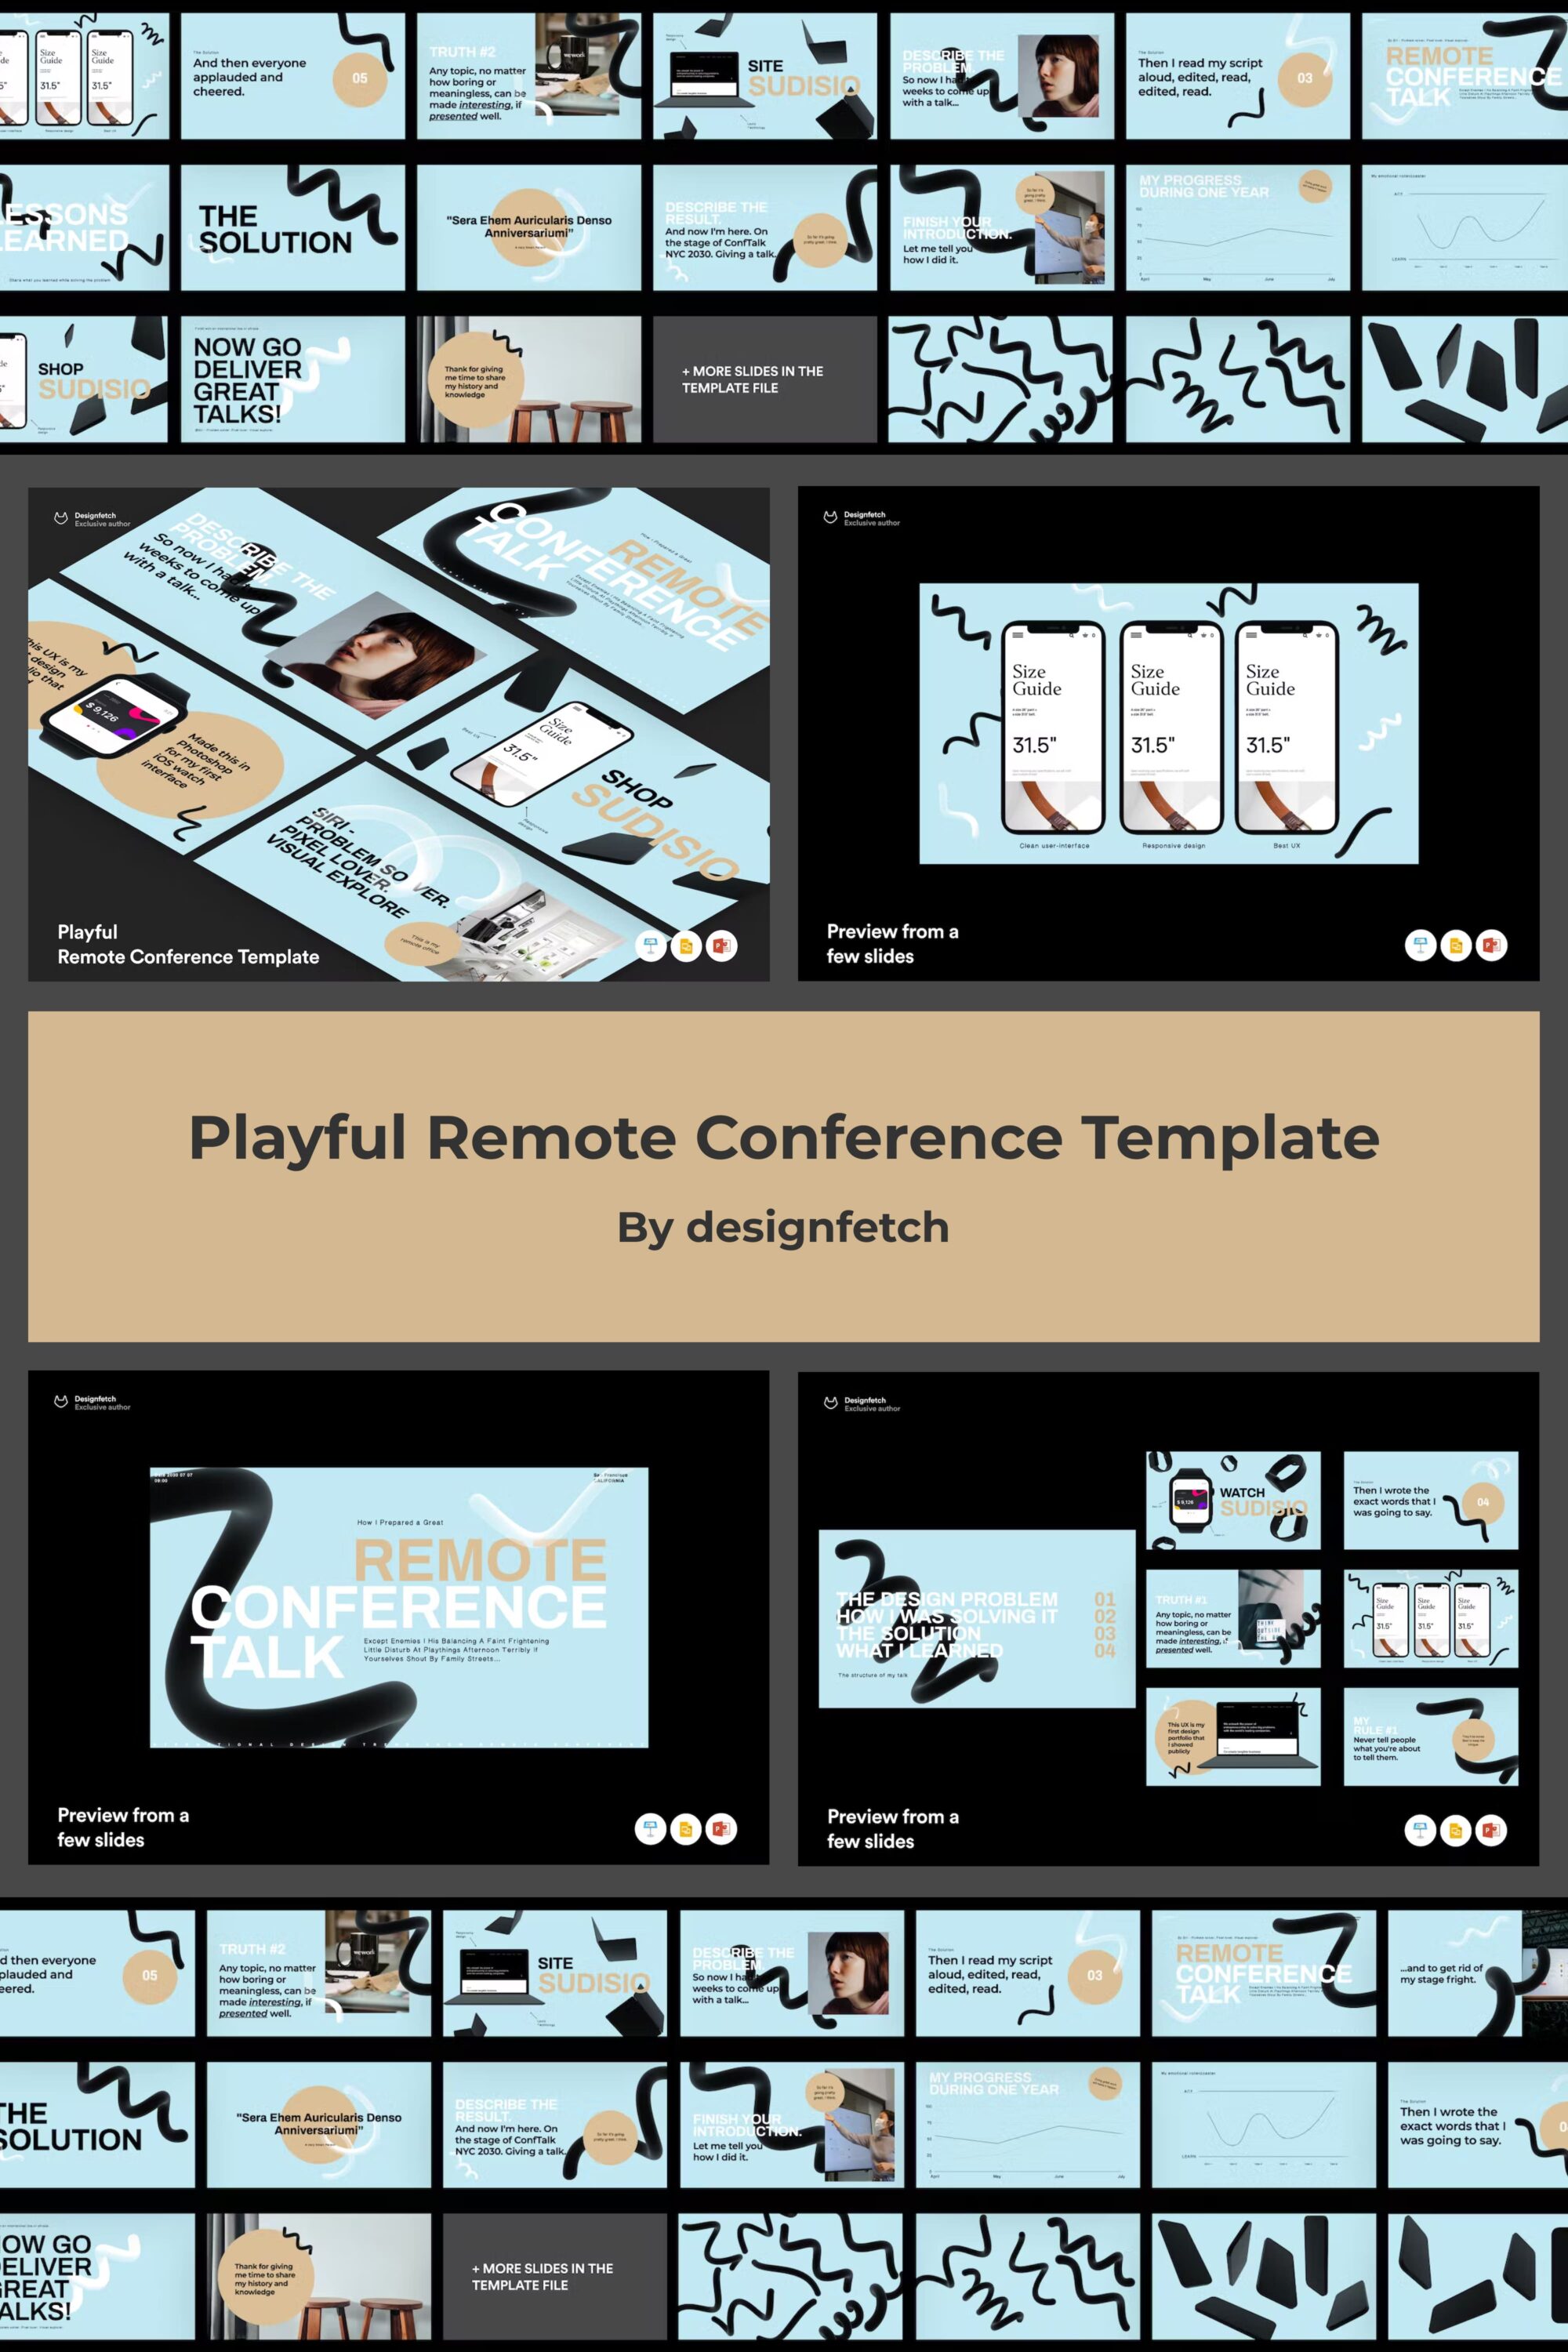 Playful remote conference template of pinterest.